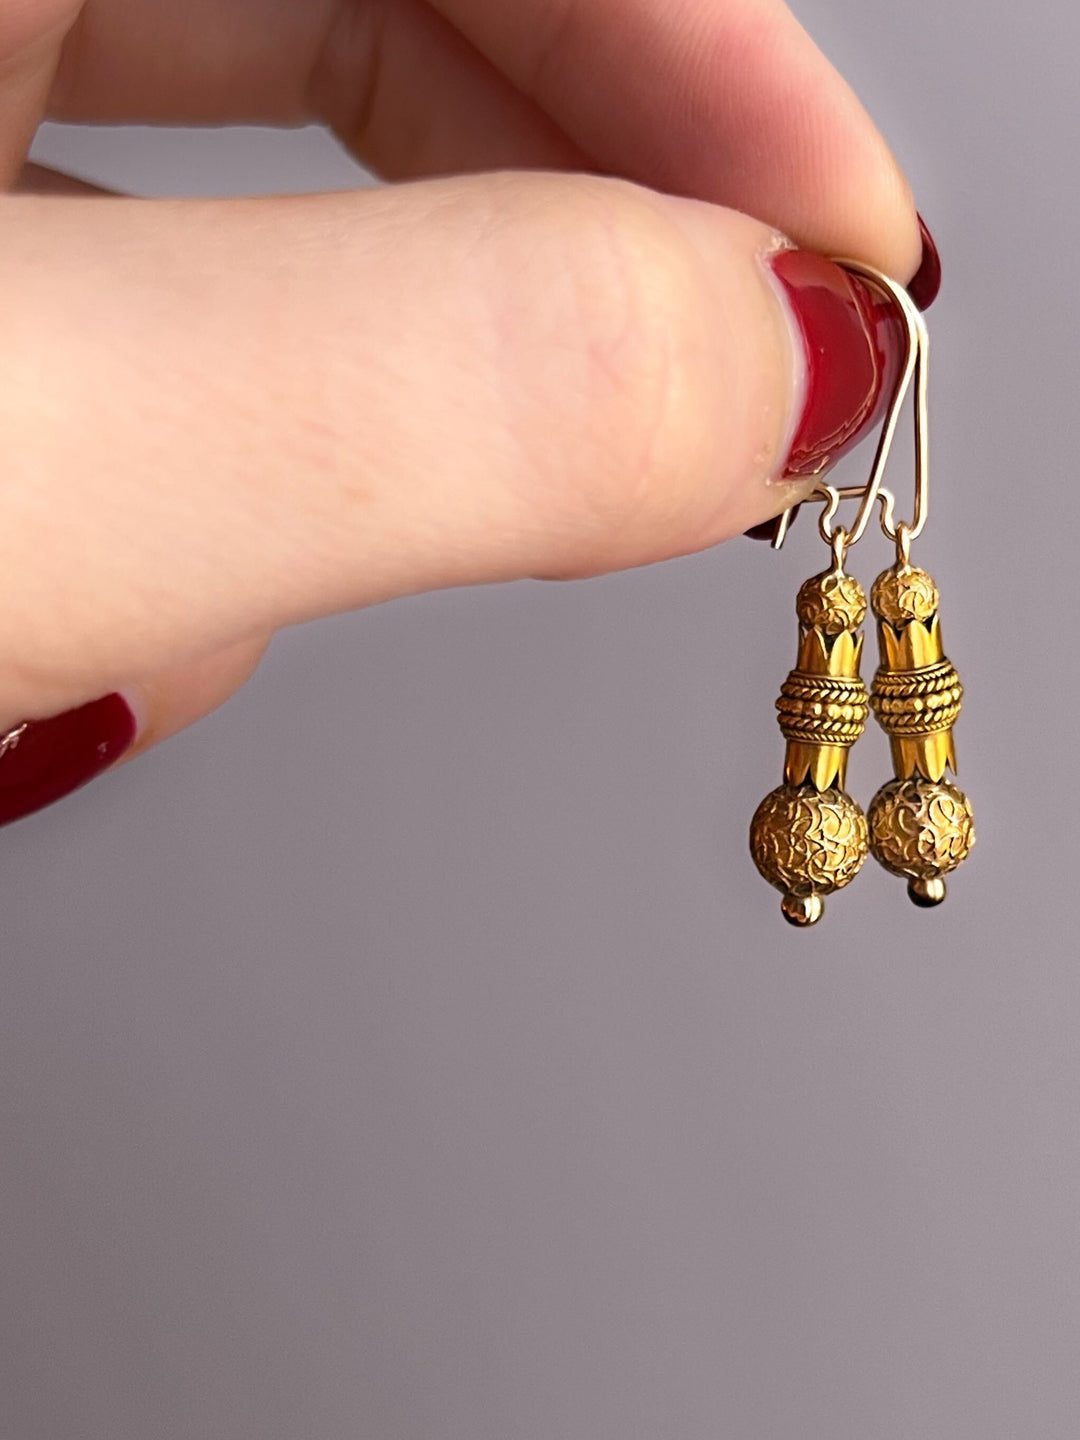 Delicious American 14k Gold Archaeological Revival Drop Earrings